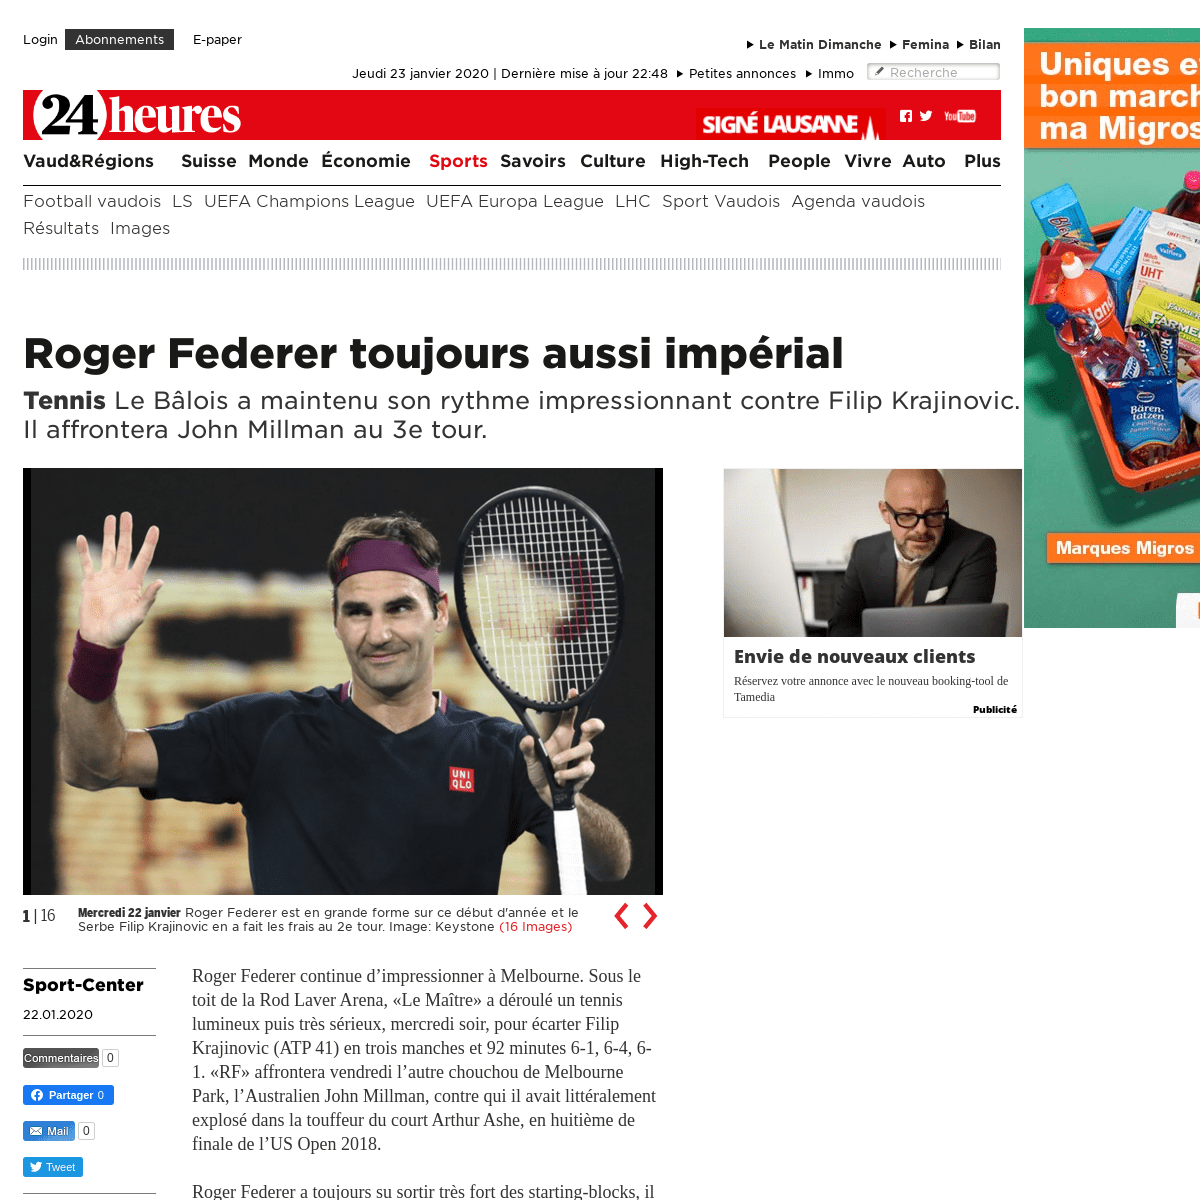 A complete backup of www.24heures.ch/sports/actu/roger-federer-toujours-imperial/story/25188473